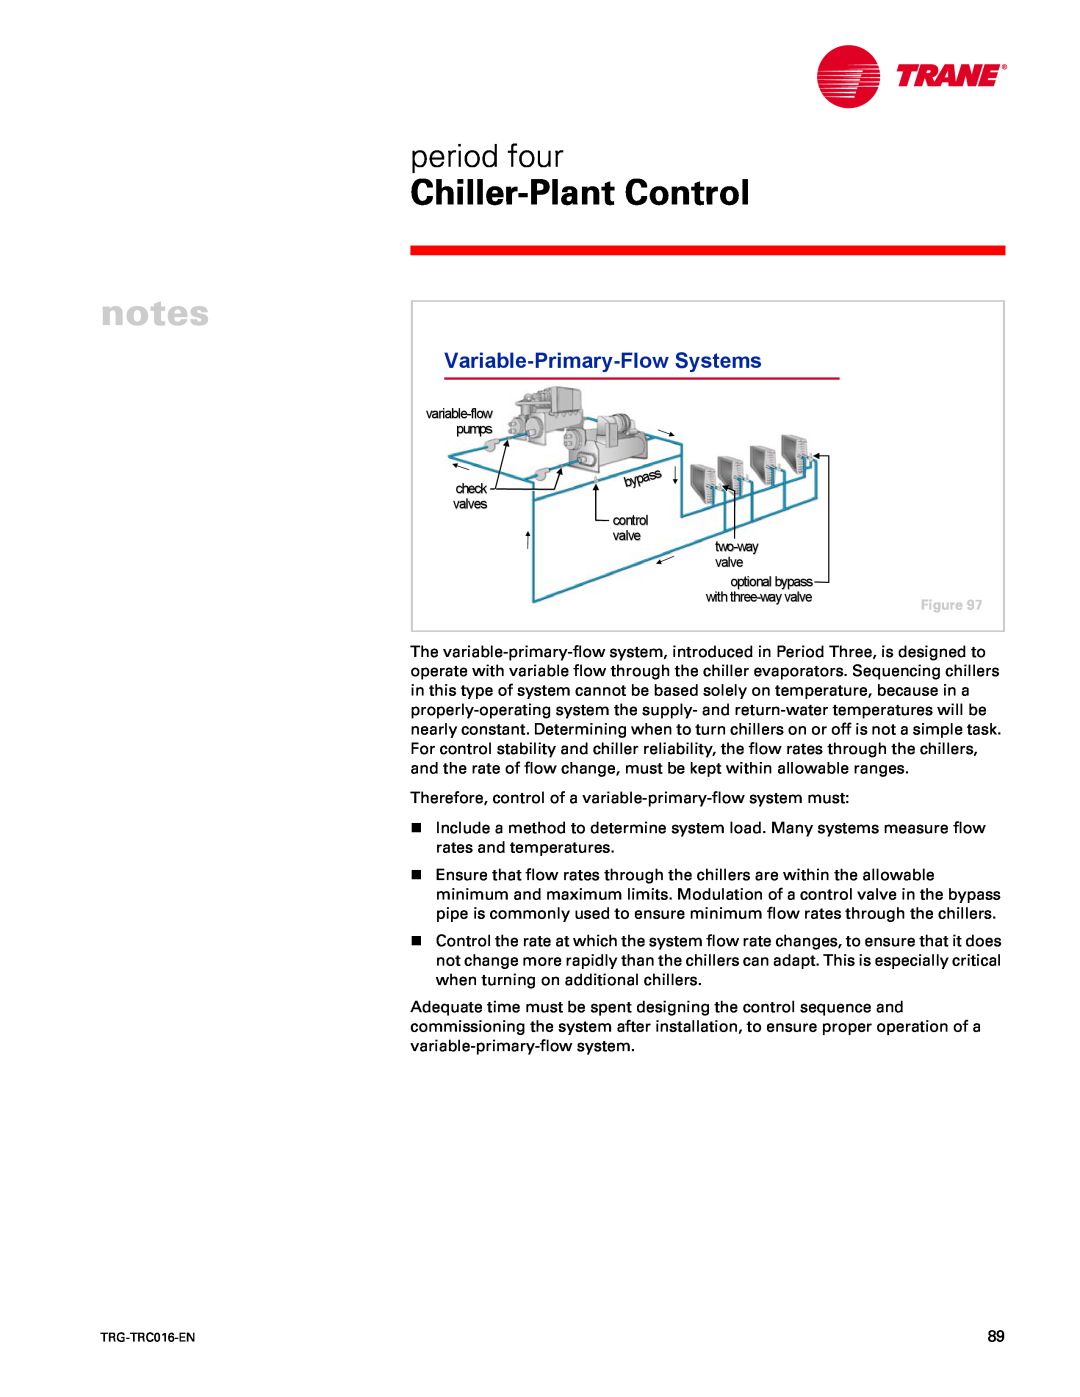 Trane TRG-TRC016-EN manual notes, Chiller-PlantControl, period four, Variable-Primary-FlowSystems 